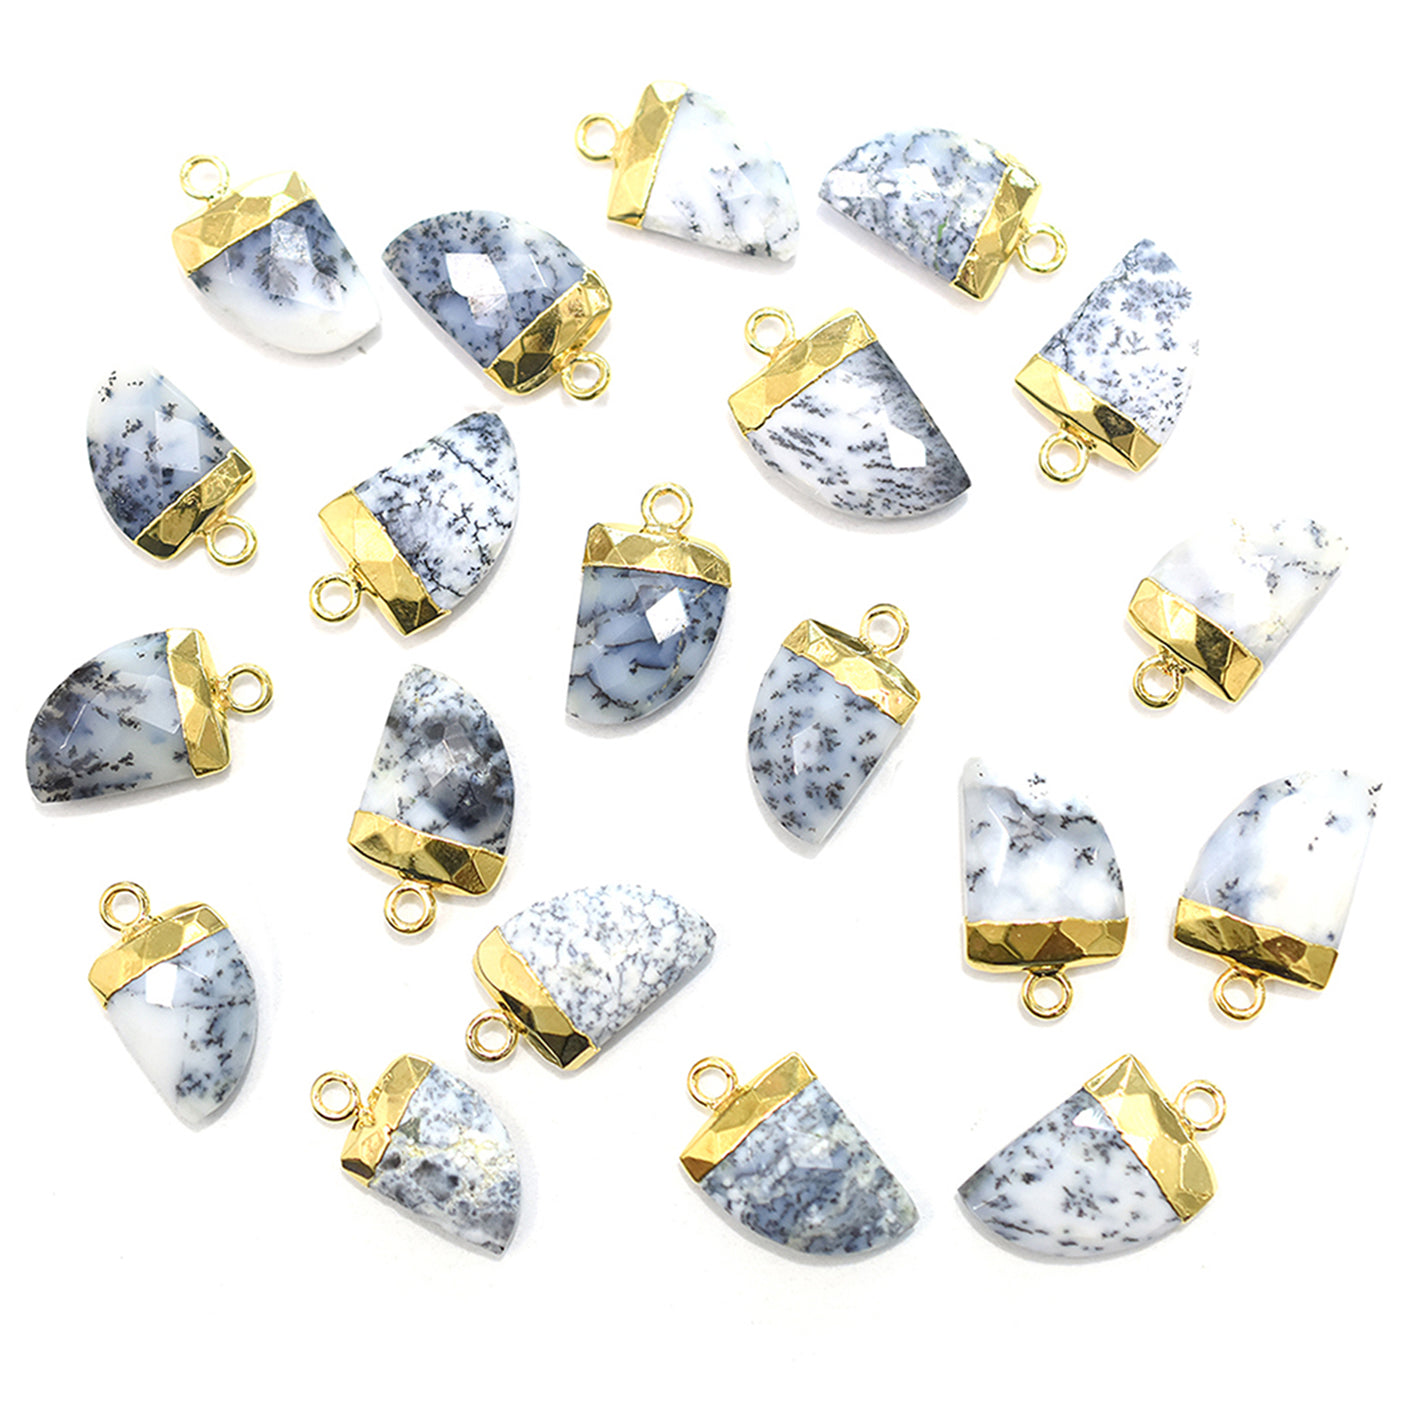 Dendritic Opal 14X10 MM Horn Shape Gold Electroplated Pendant